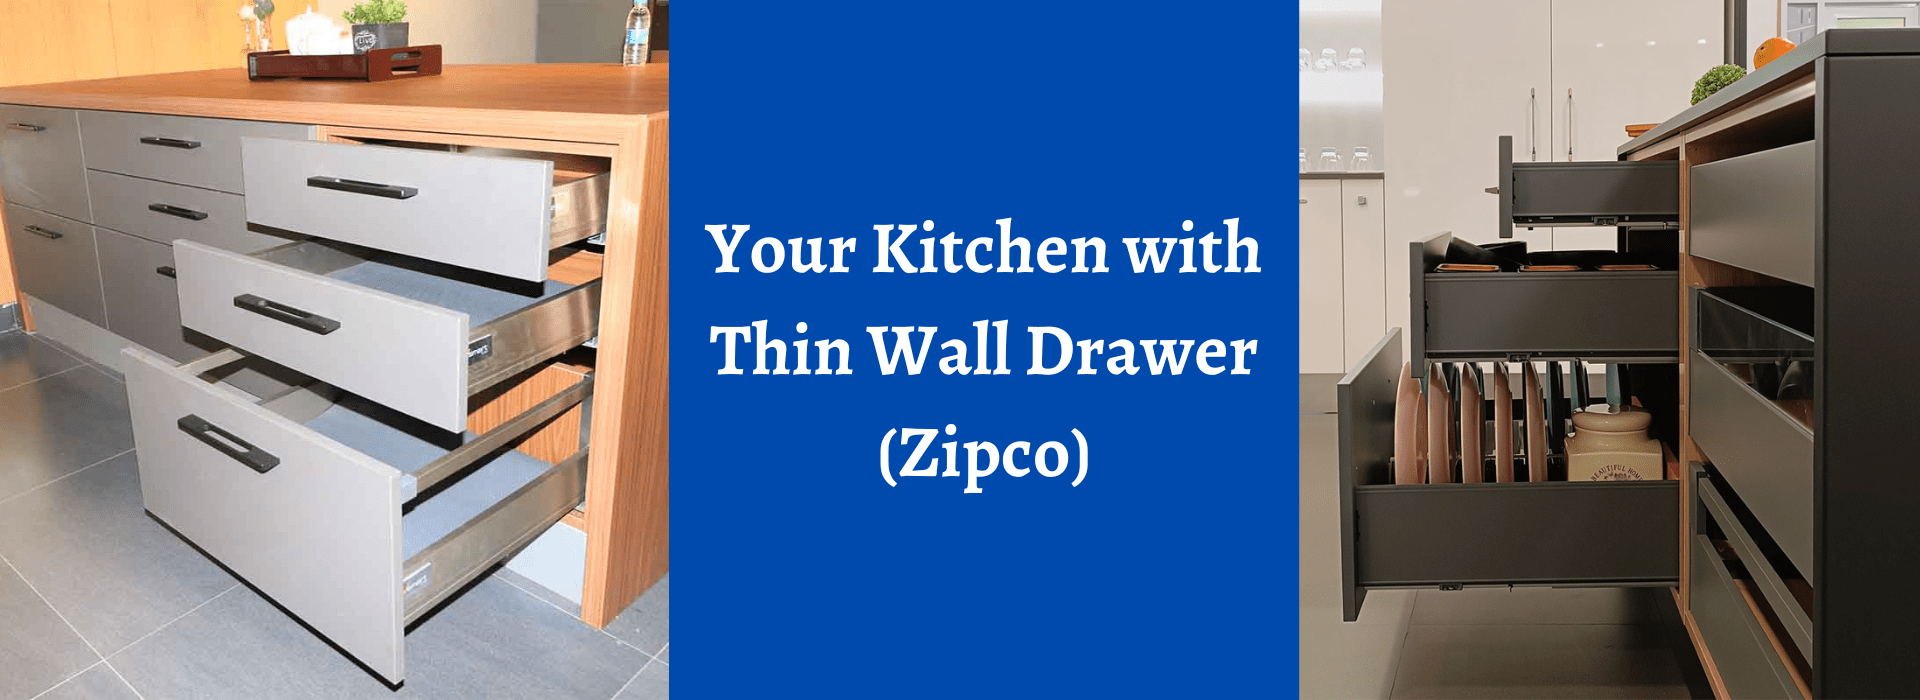 your Ktchen with Thin Wall Drawer (Zipco)